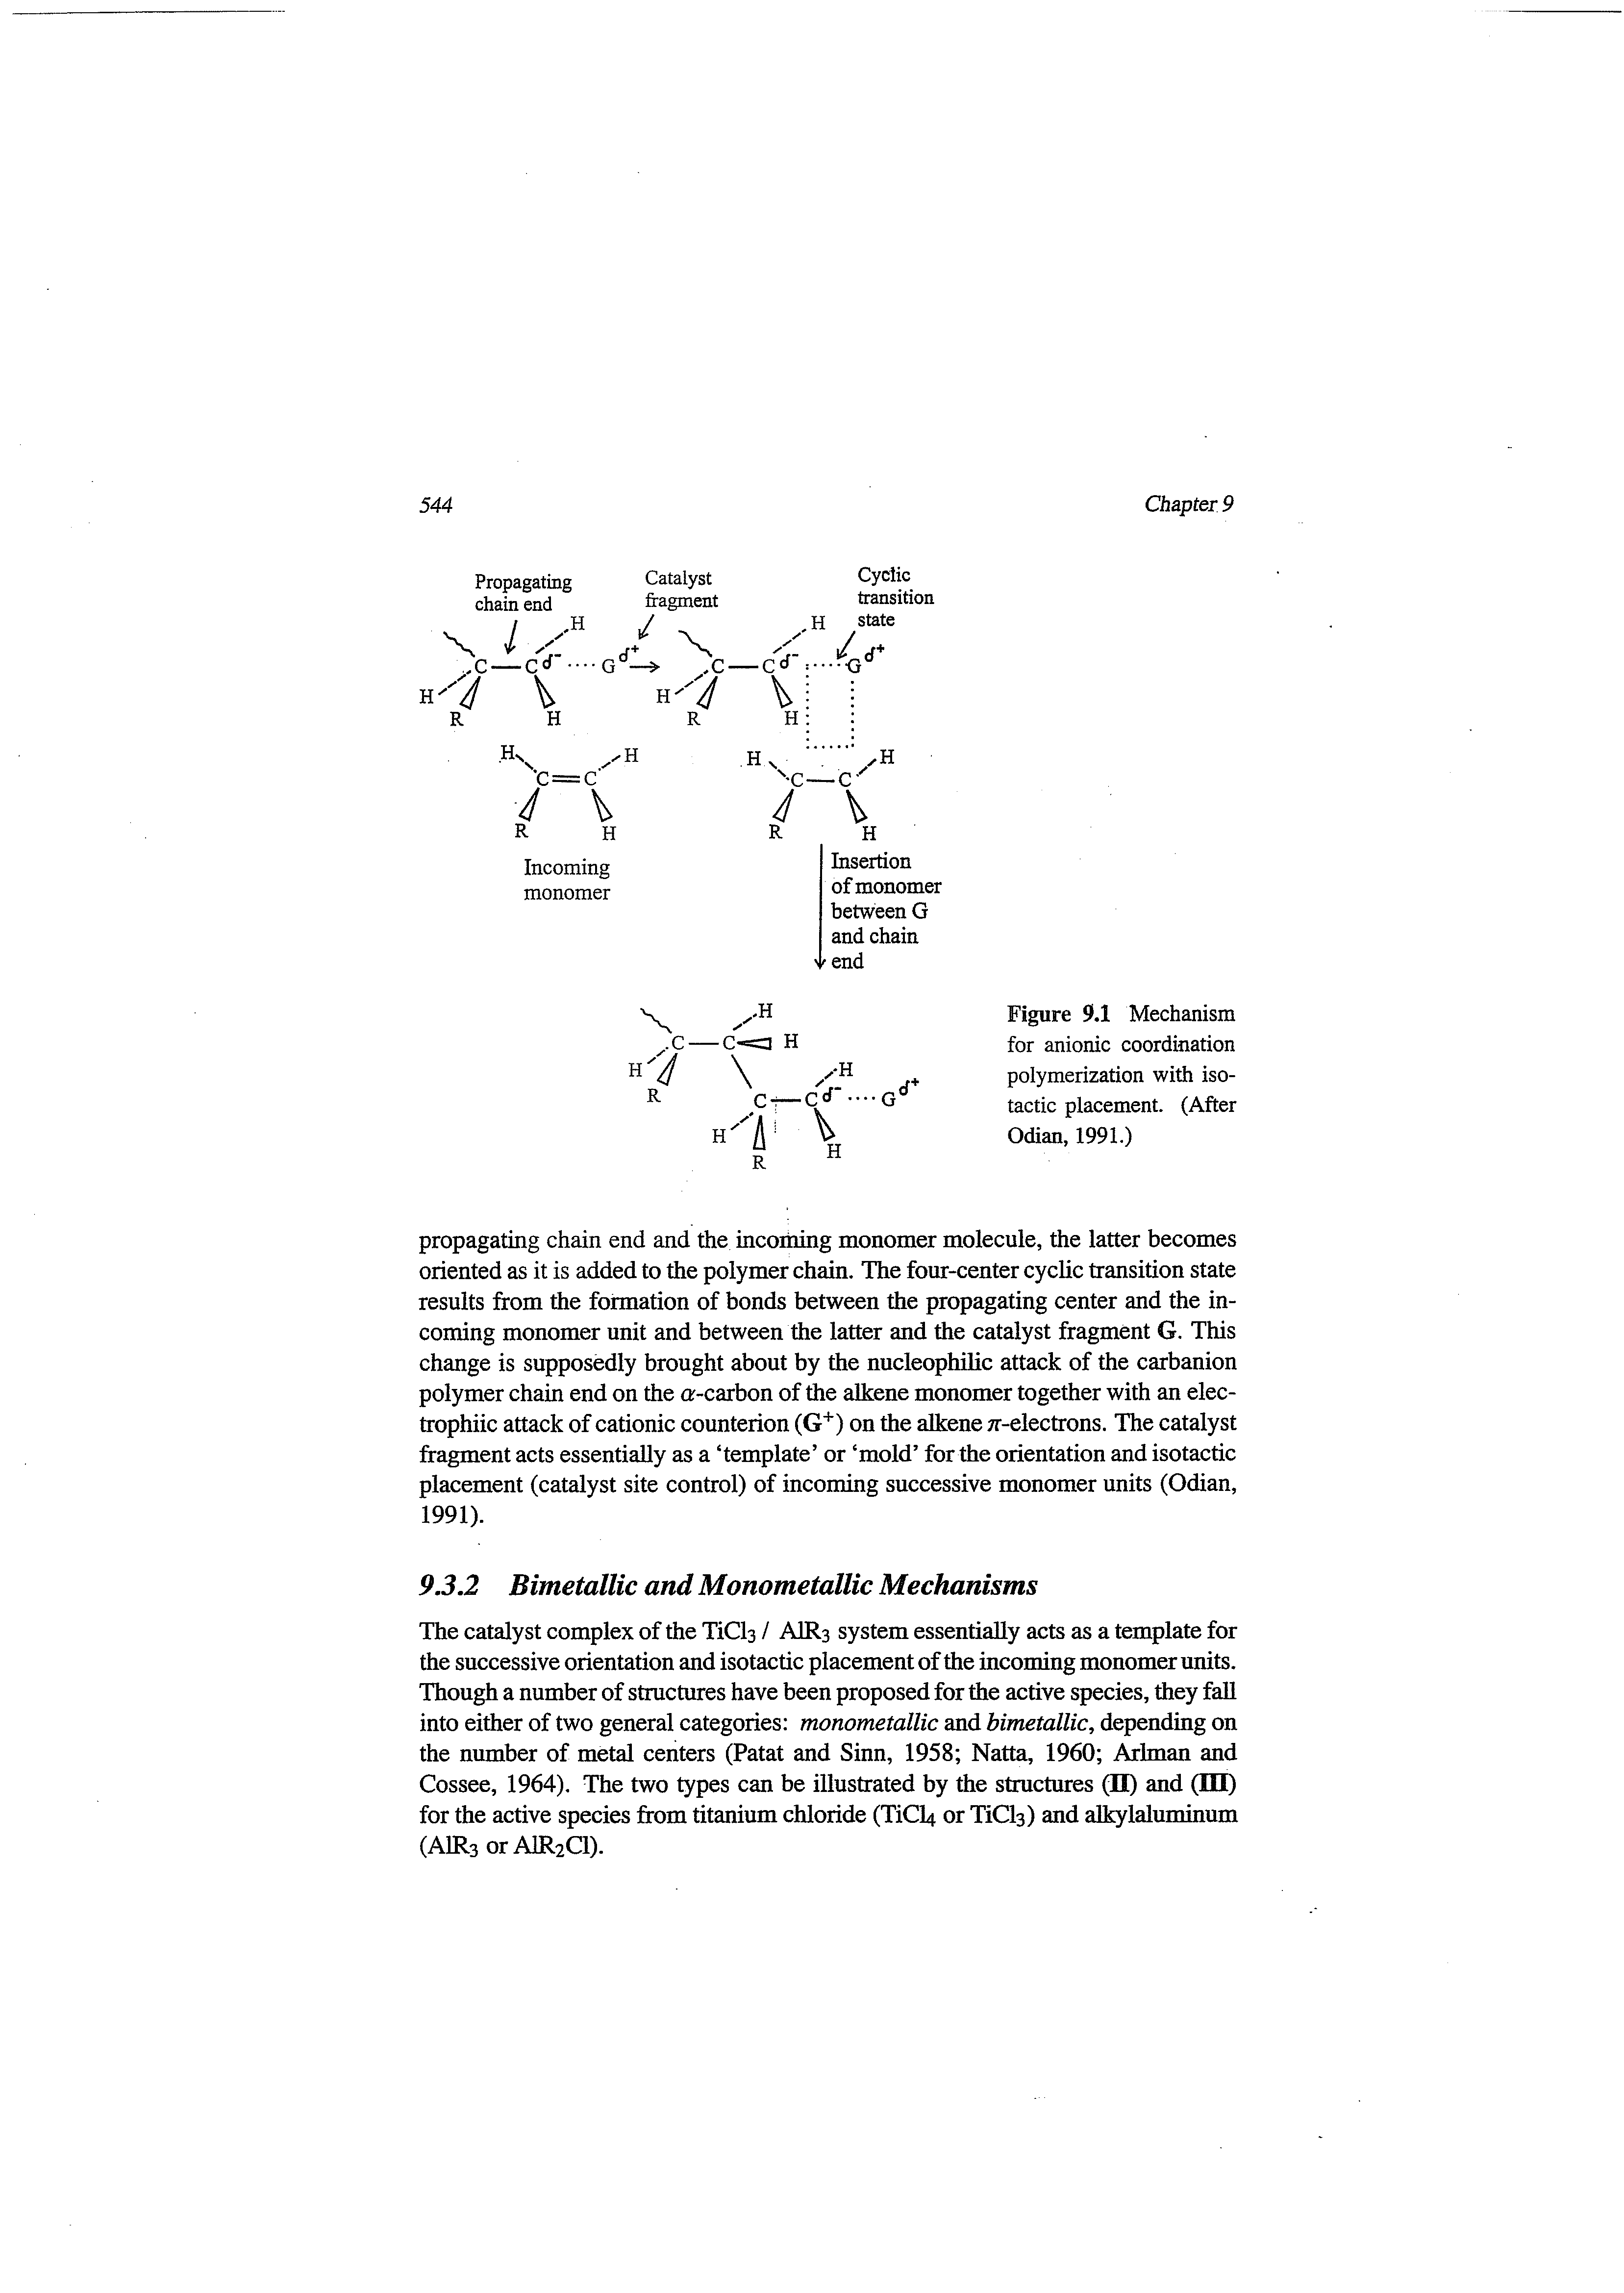 Figure 9.1 Mechanism for anionic coordination polymerization with isotactic placement. (After Odian, 1991.)...